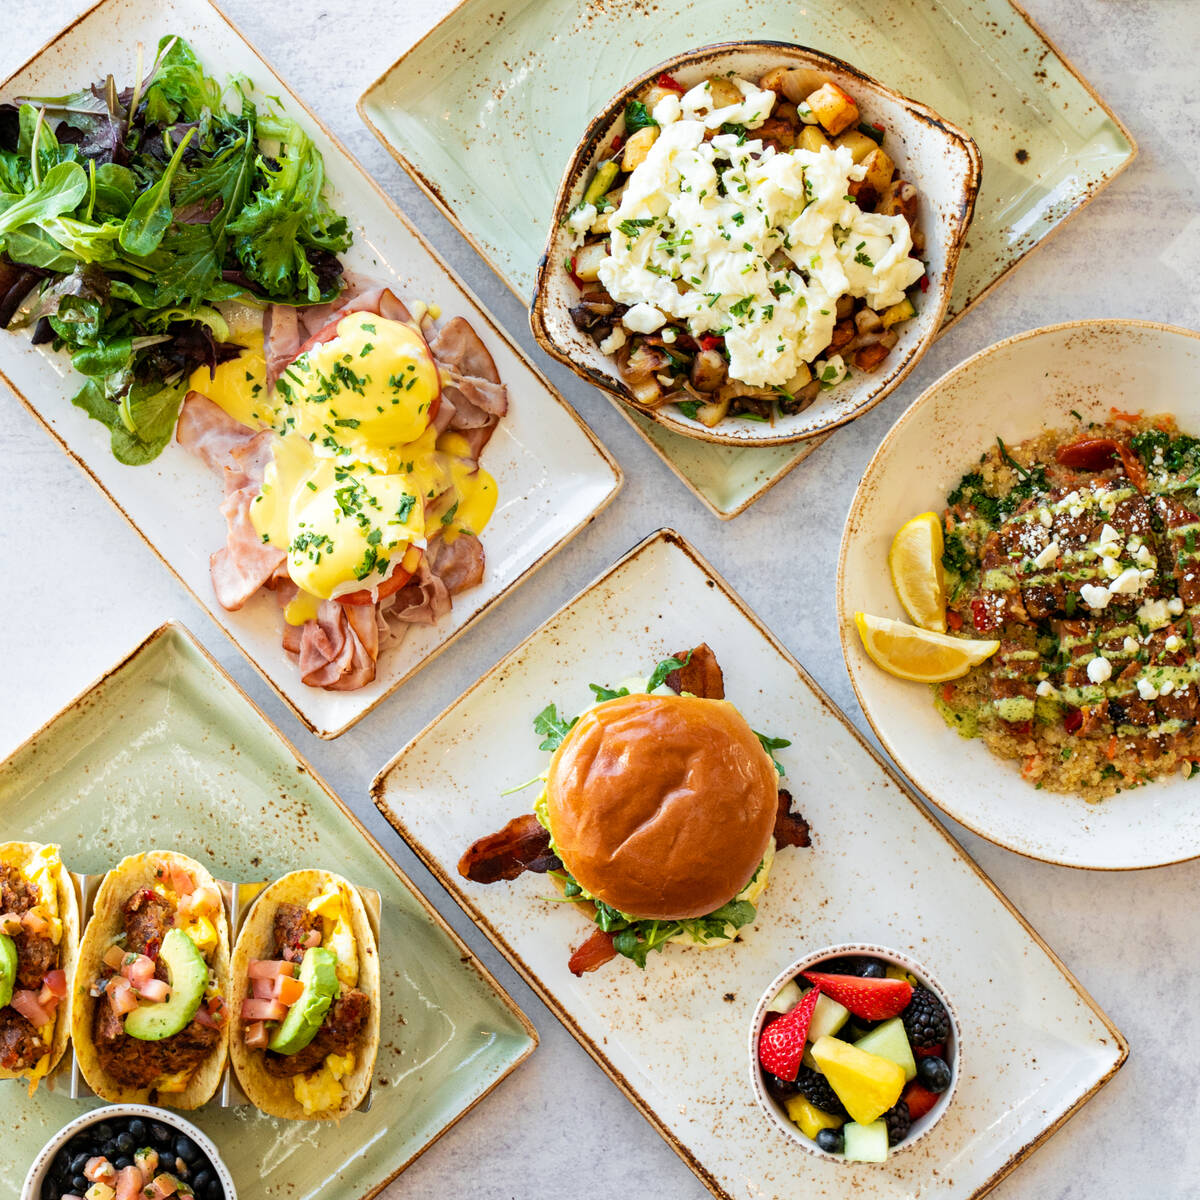 A brunch spread from First Watch, the national chain serving chef-driven breakfast and brunch. ...